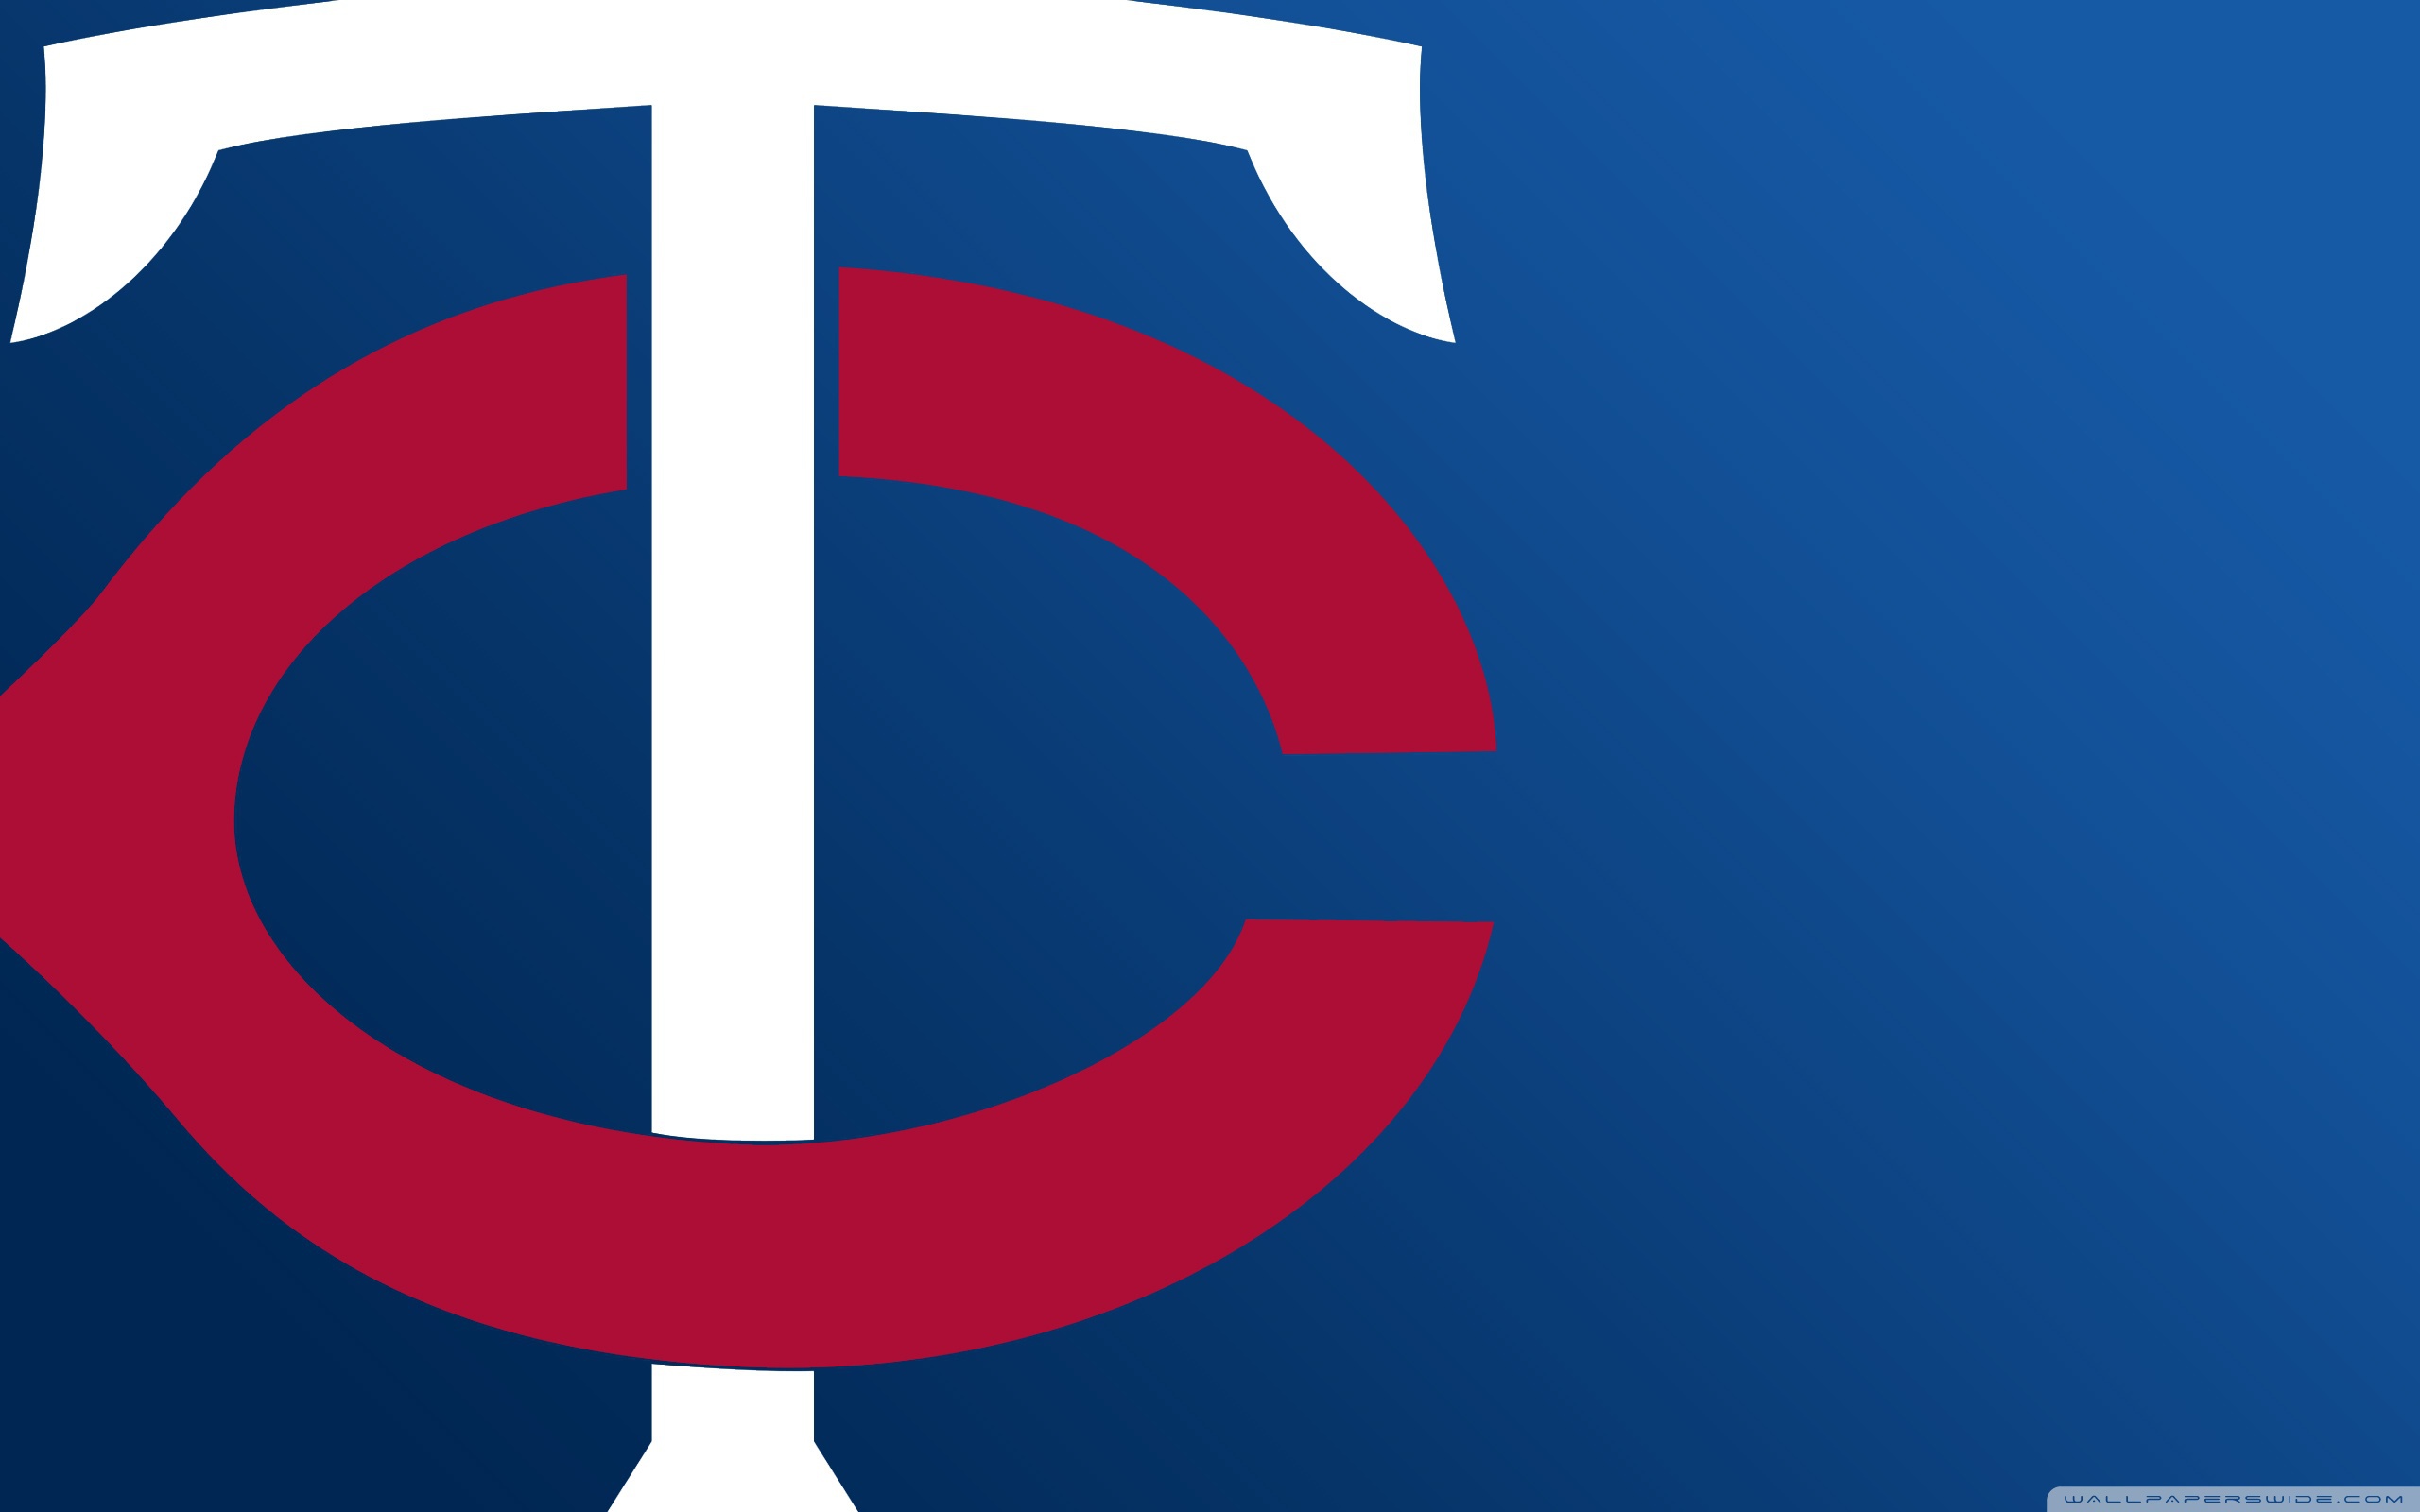 Free download Minnesota Twins Baseball Club wallpapers and images